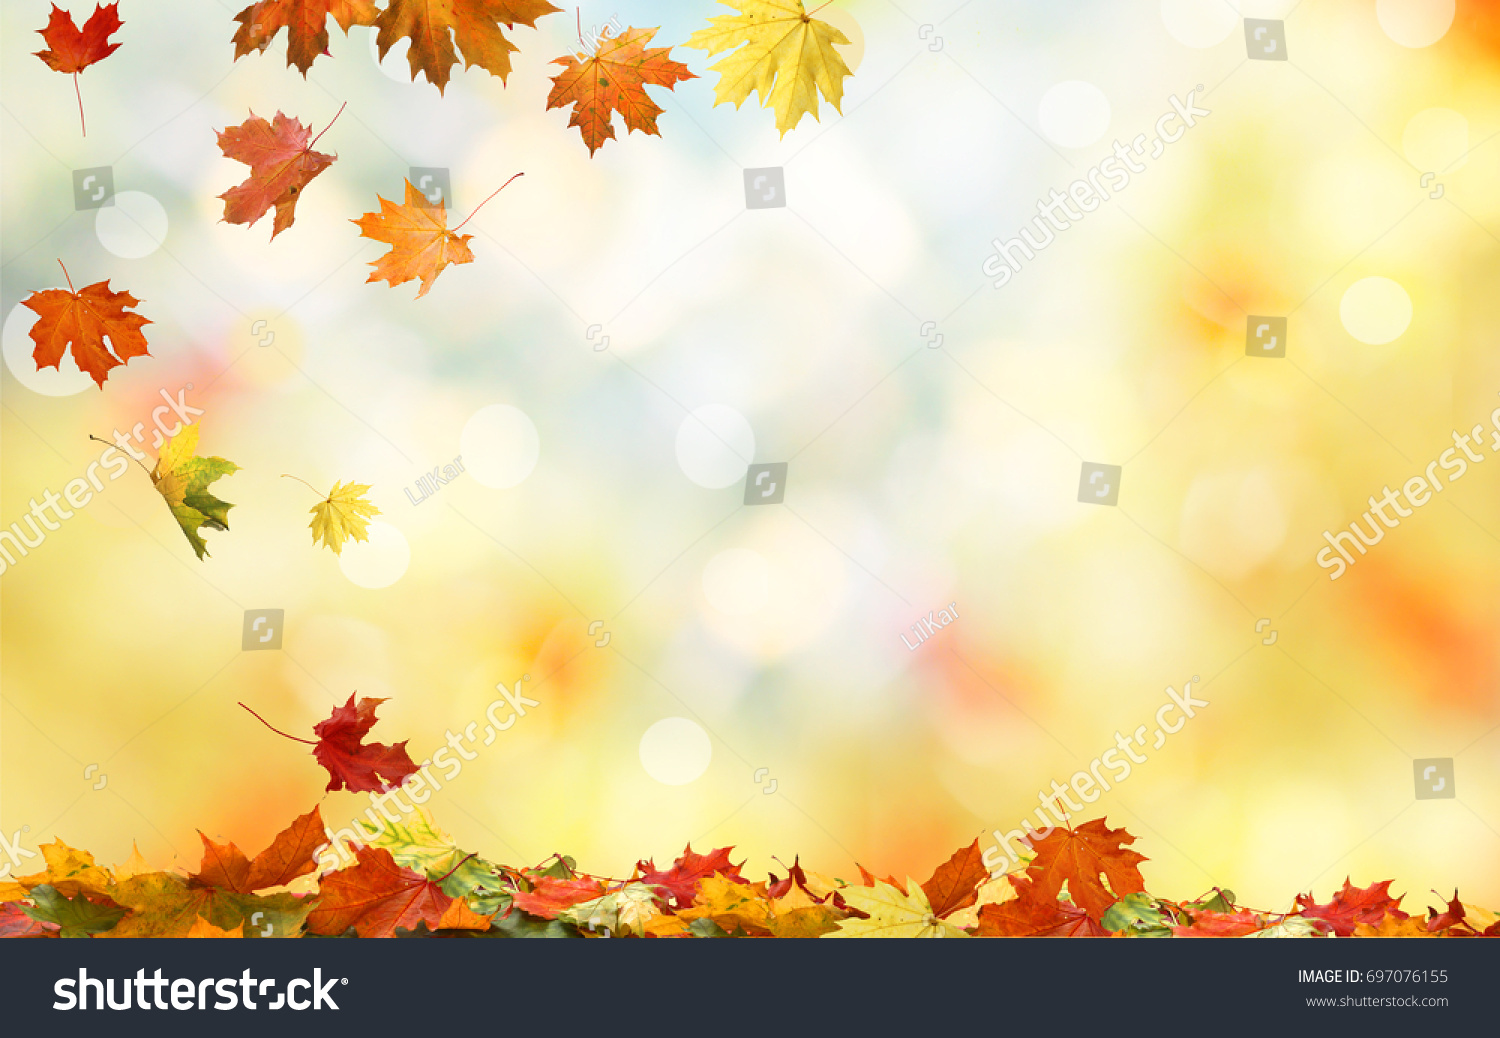 Fall Leaves Powerpoint Template Free